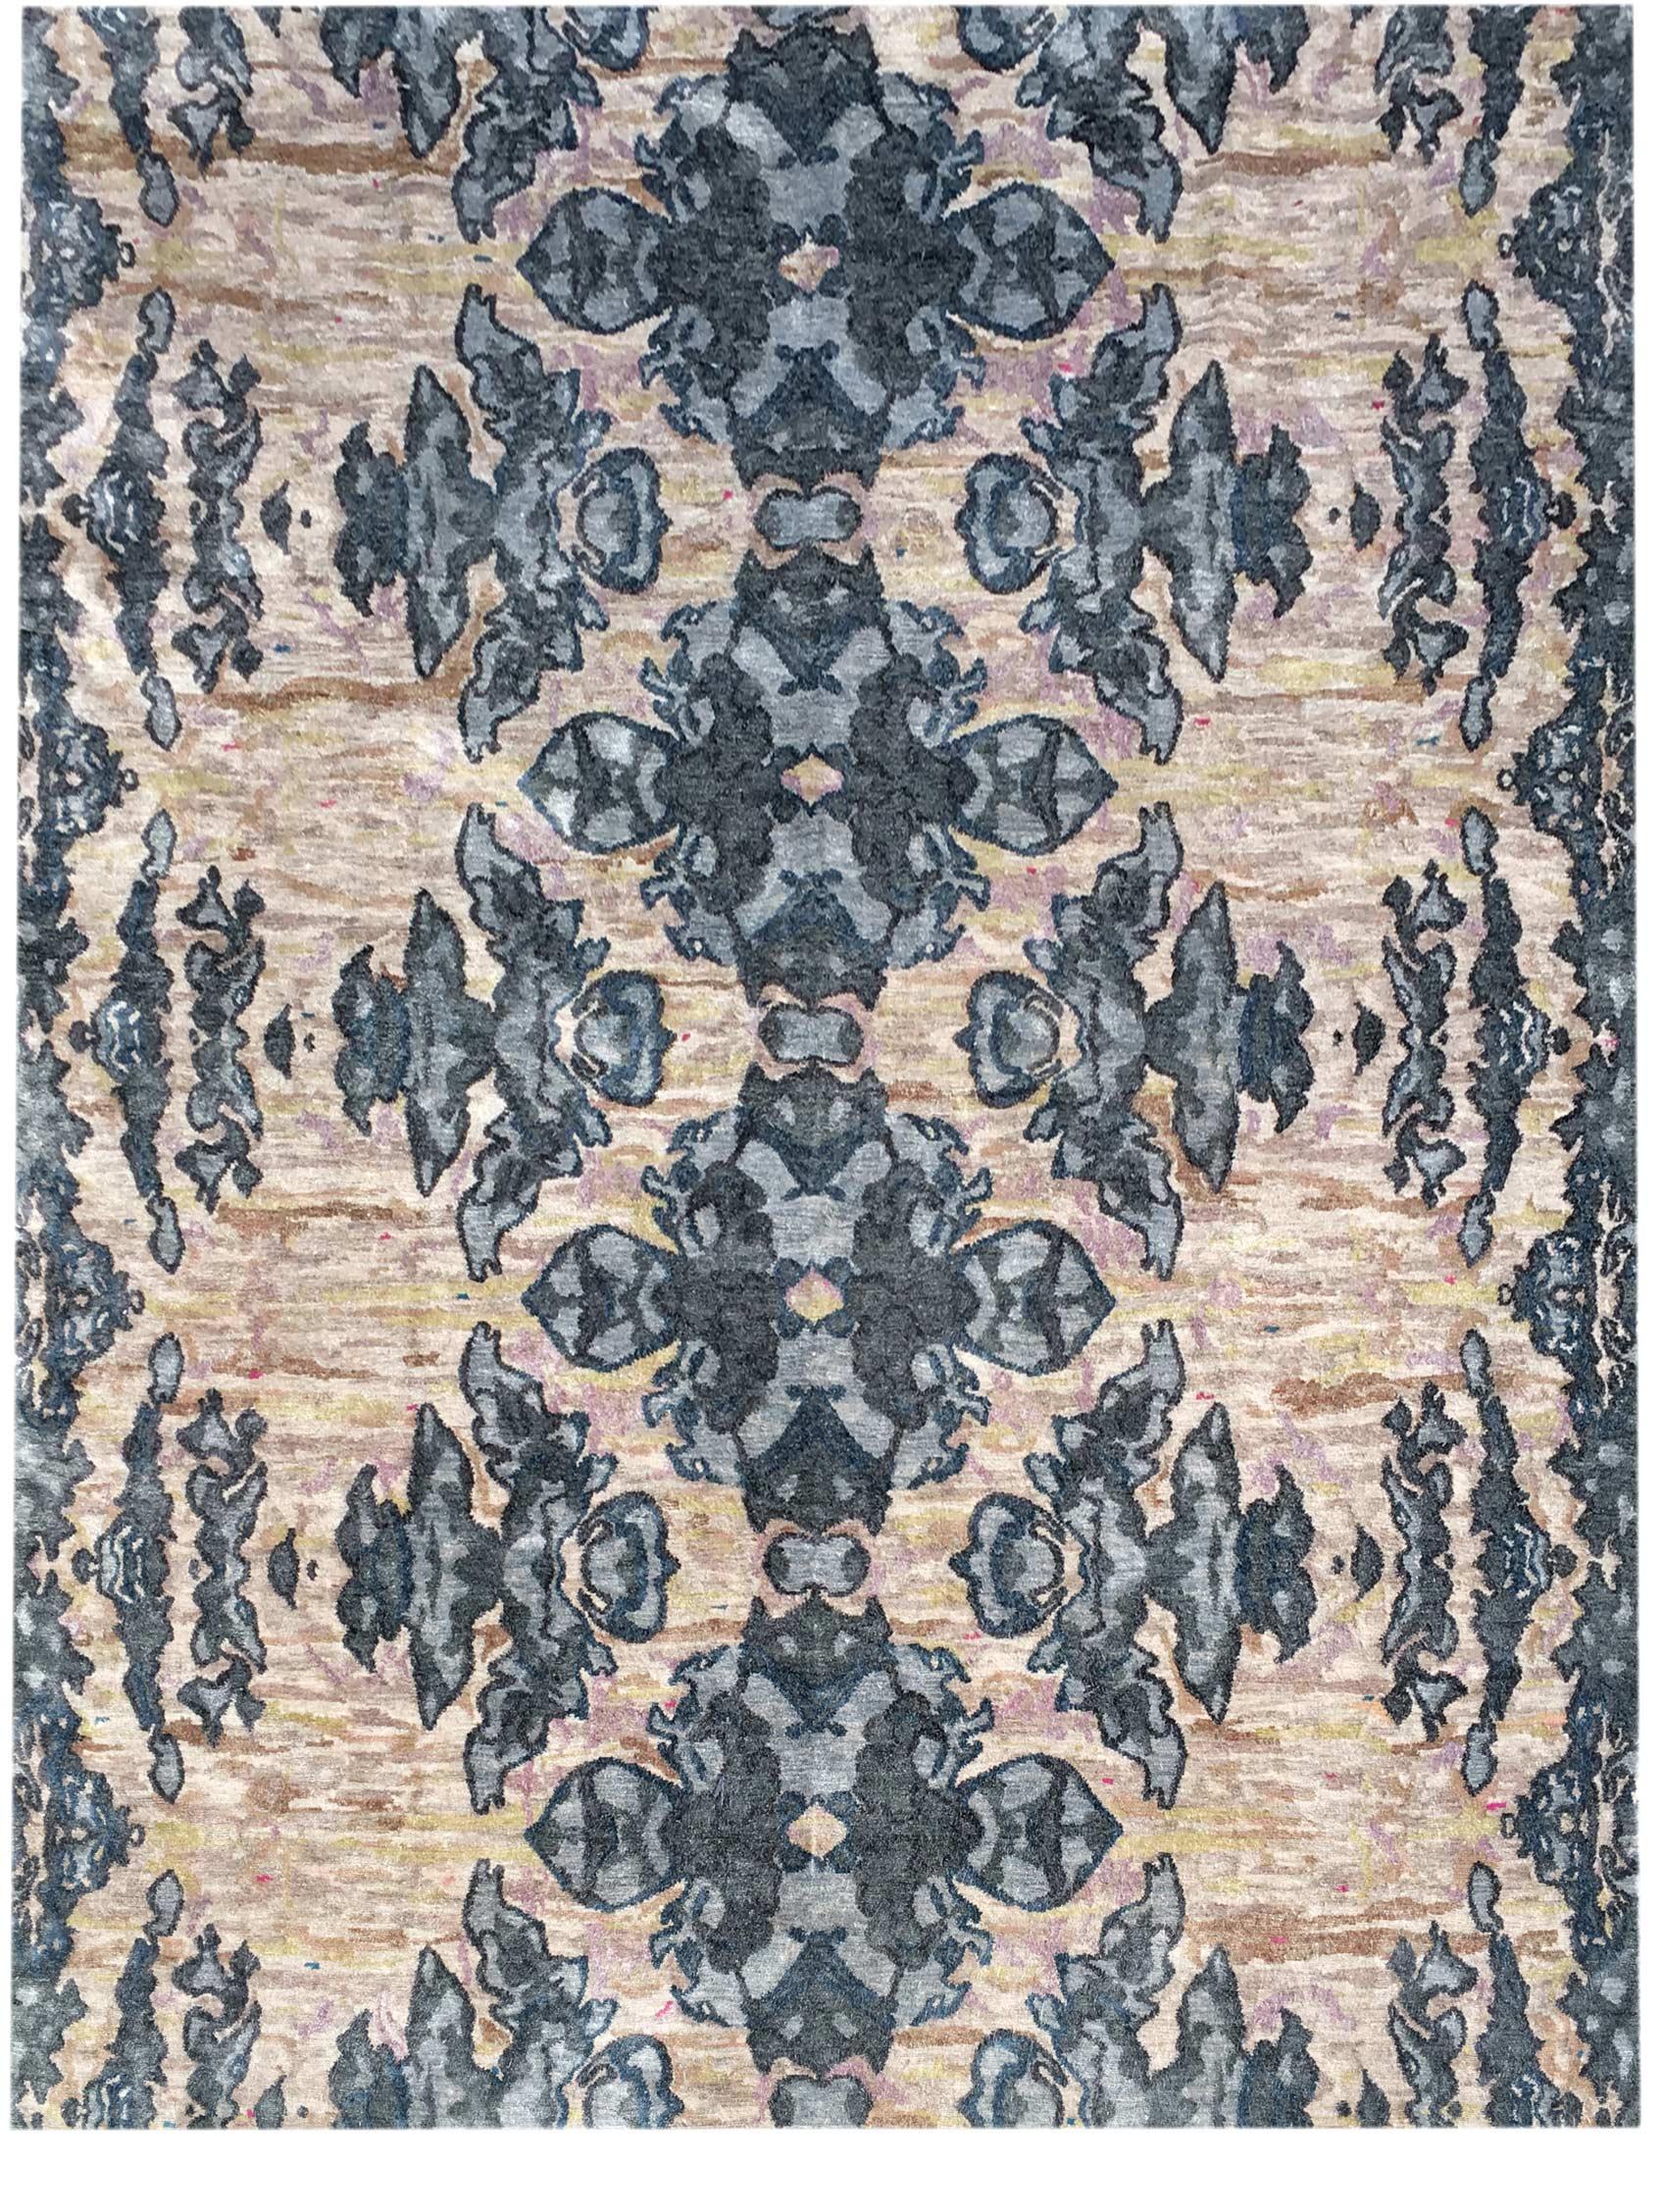 The Dance olive hand knotted rug by Eskayel
Dimensions: D 9' x H 12'
Pile height: 6 mm
Materials: 70% Matka silk, 30% Bamboo silk.

Eskayel hand knotted rugs are woven to order and can be customized in various sizes, colors, materials, and